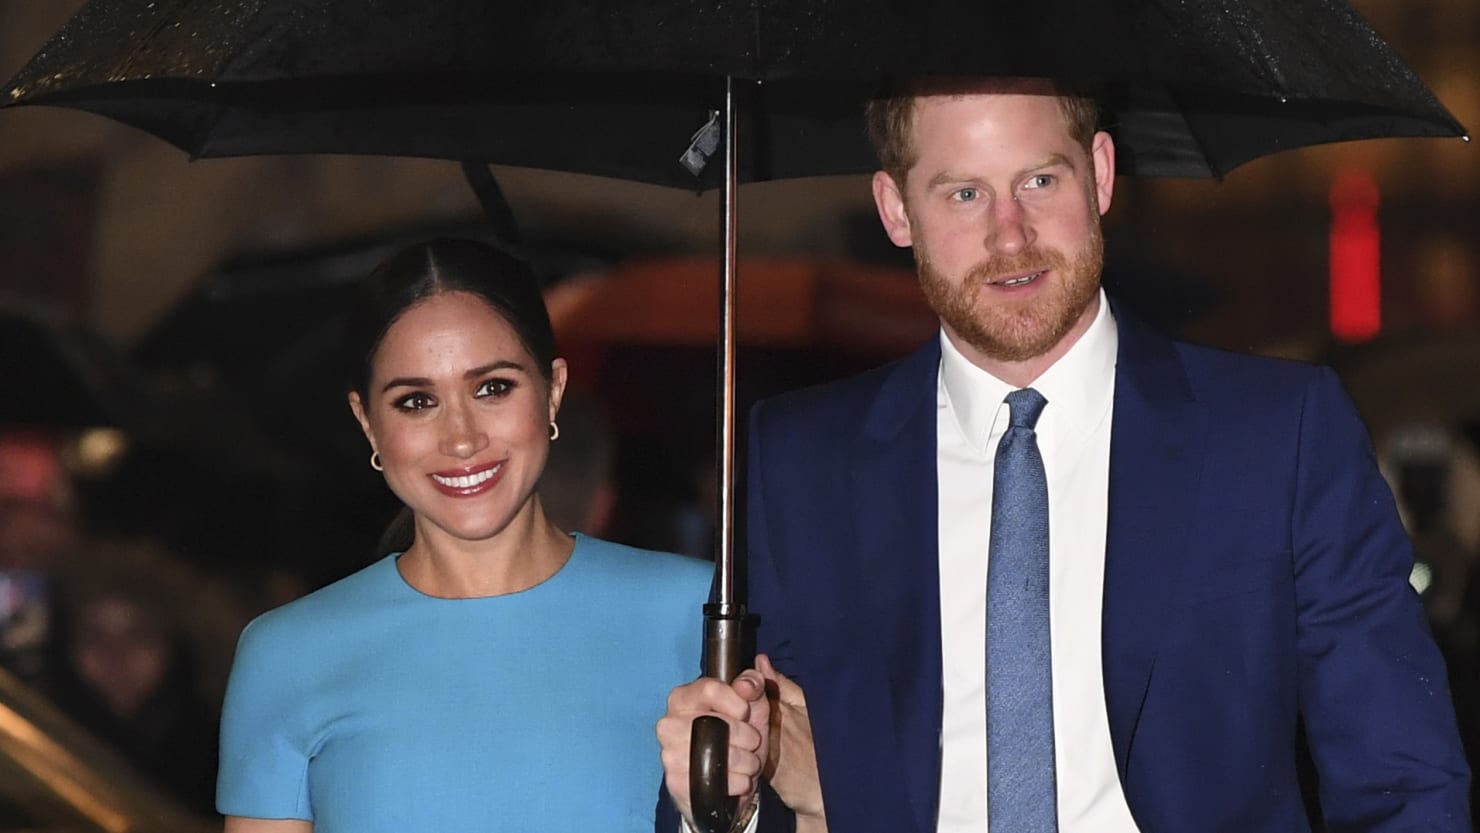 Meghan Markle and Prince Harry are asked to delay Oprah’s interview while Prince Philip is seriously ill